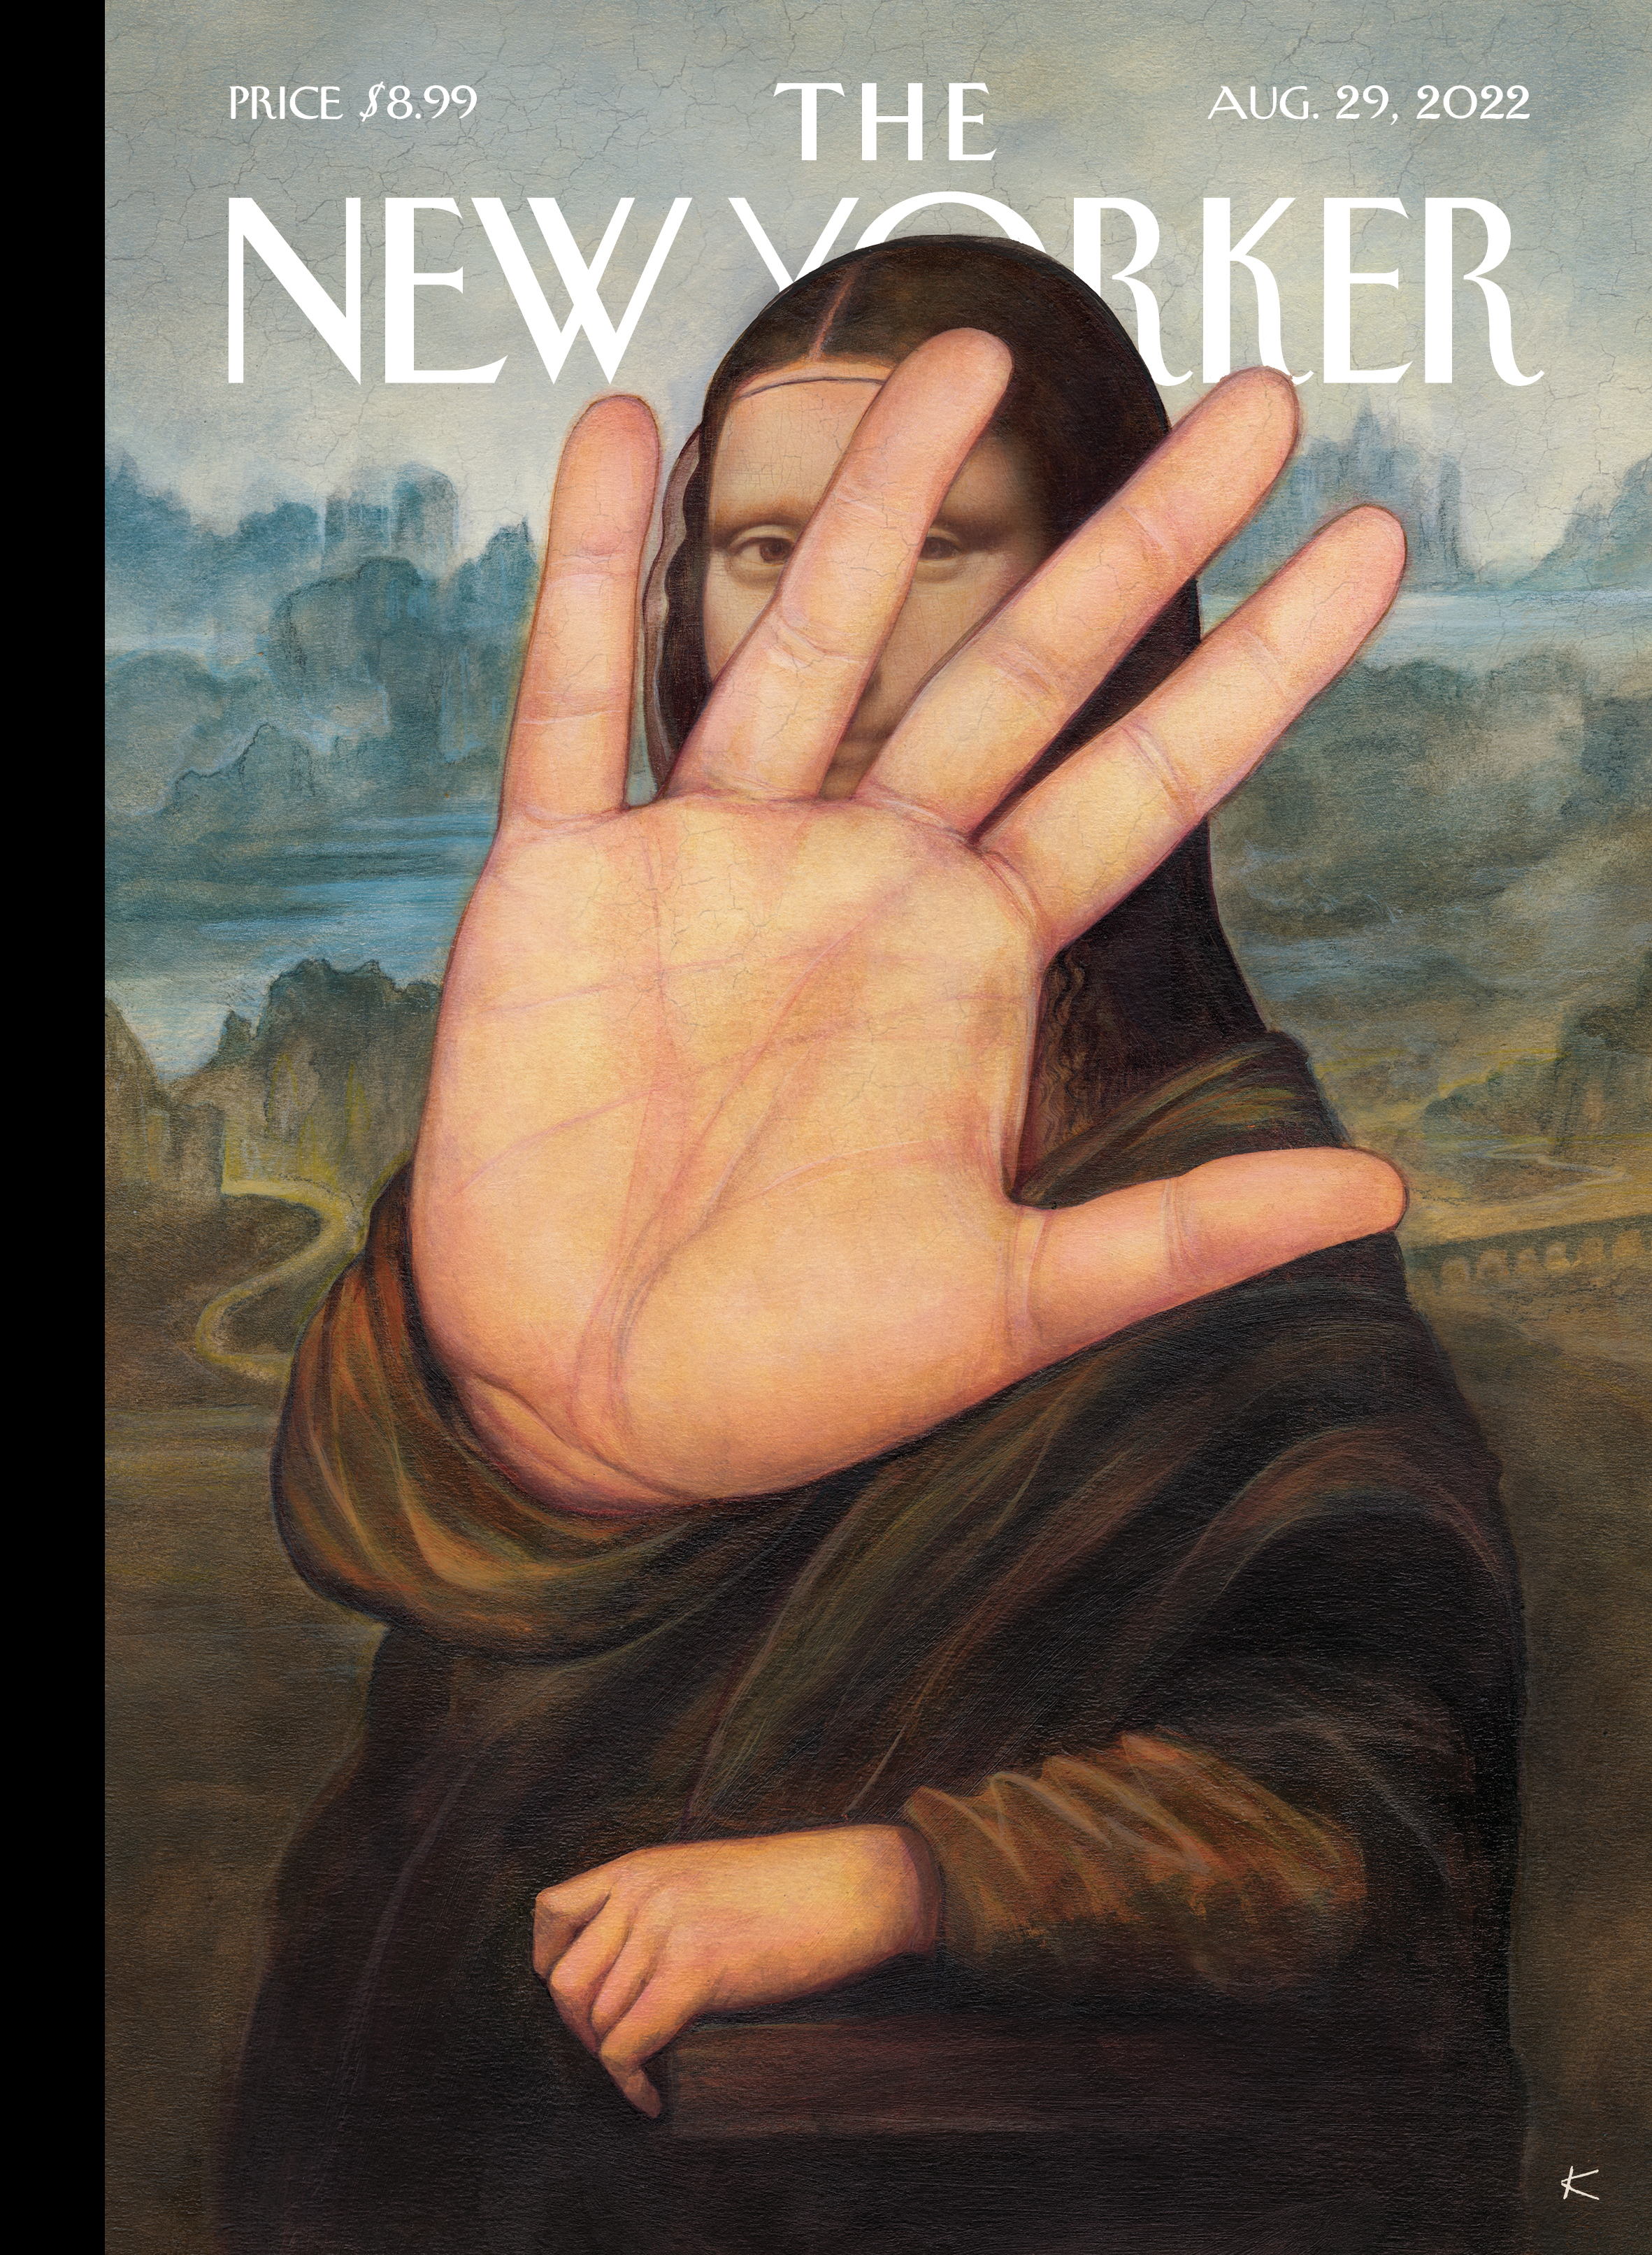 The New Yorker “No Photos, Please!” August 29, 2022